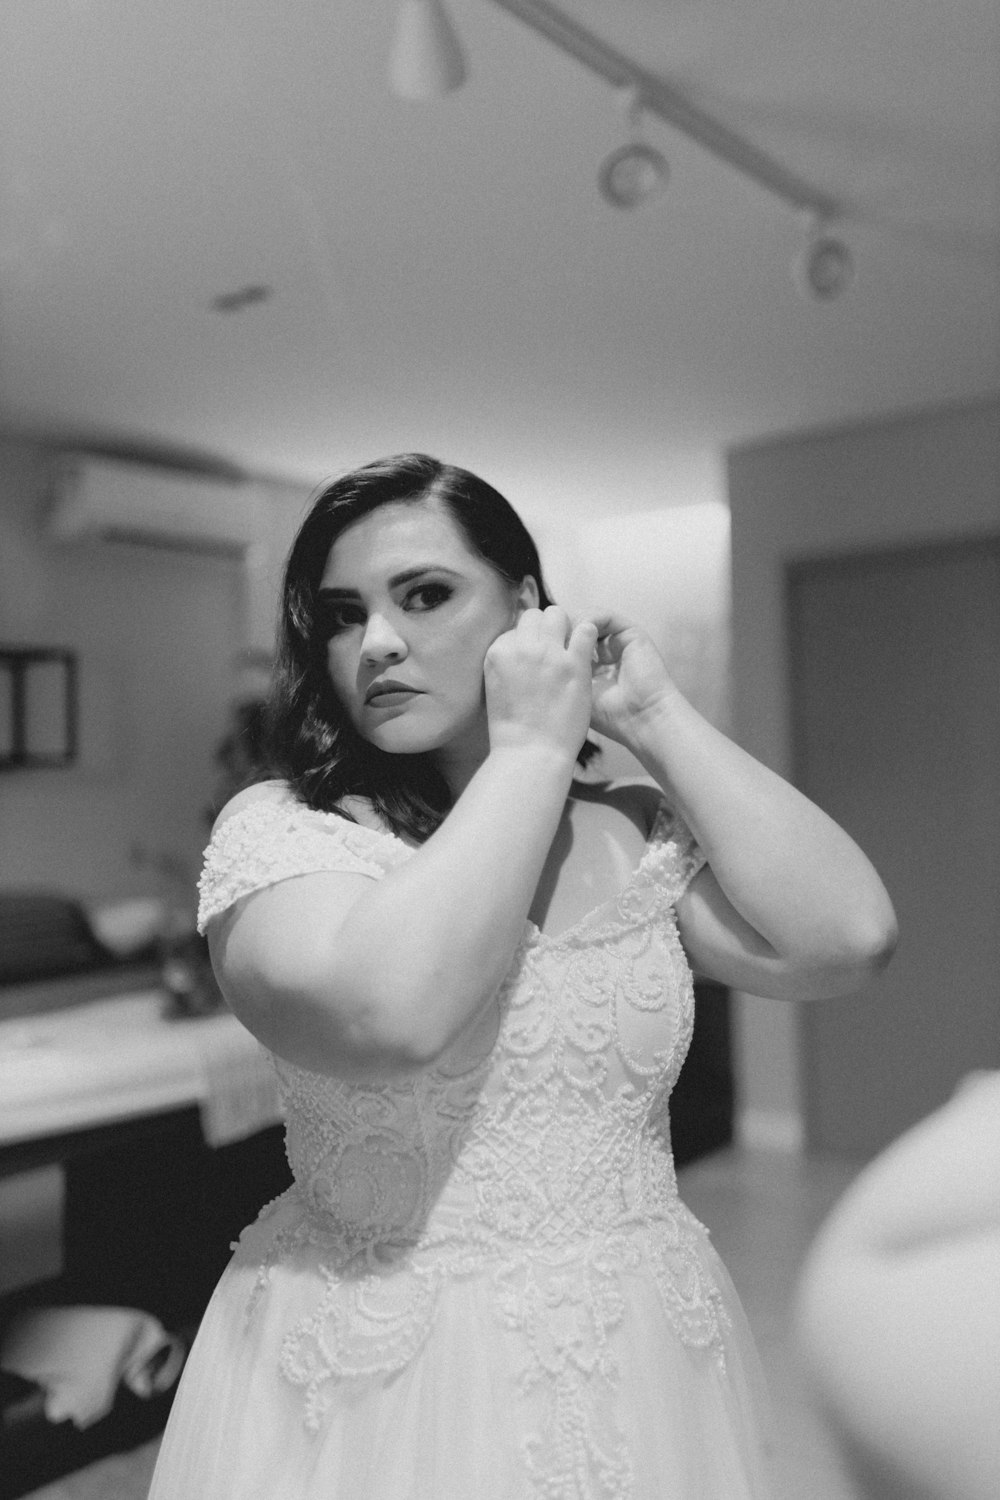 a woman in a wedding dress adjusting her hair